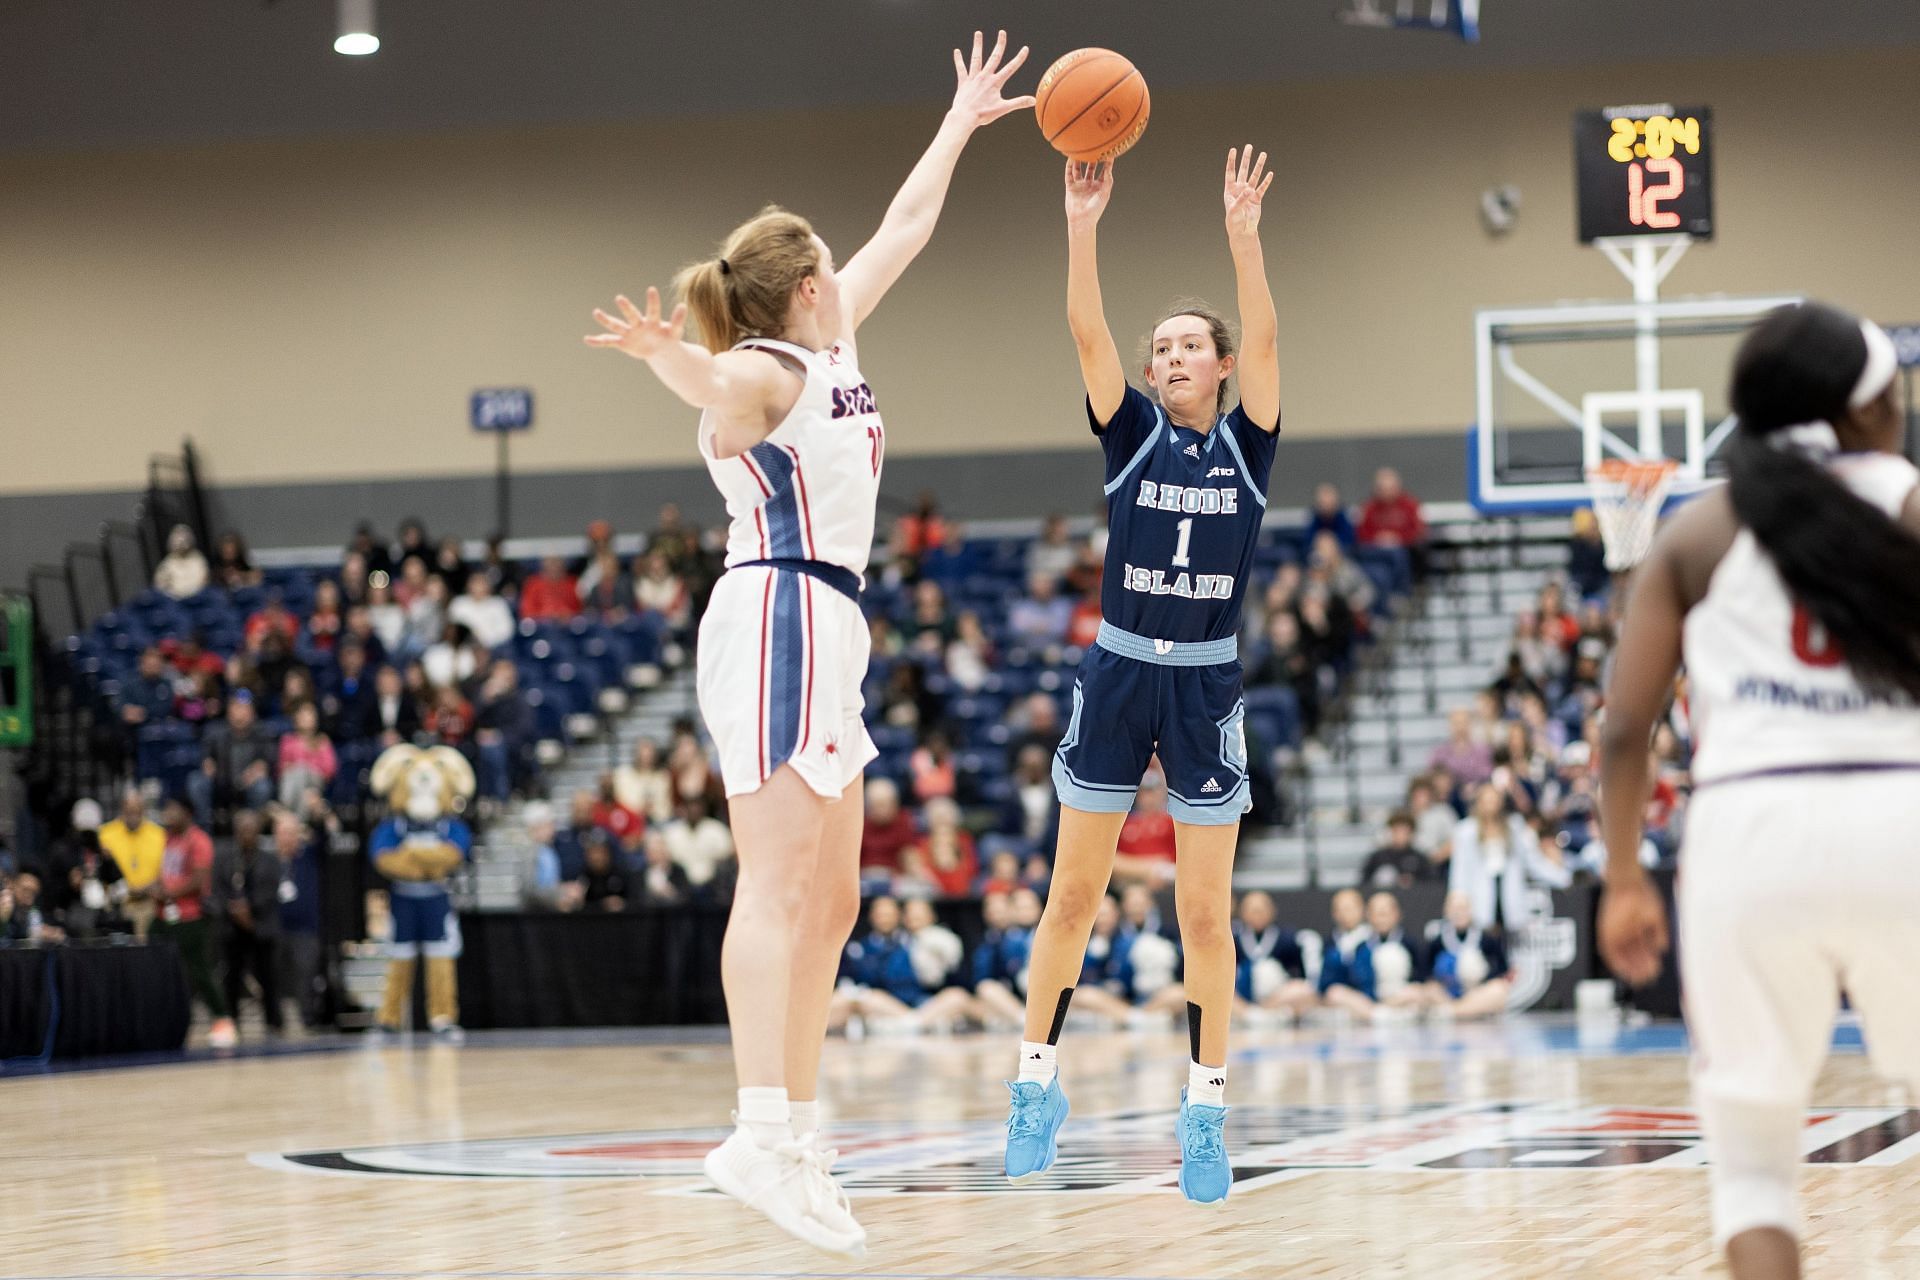 Sophie Phillips and No. 6 seed Rhode Island made a gallant run to the finals of the Atlantic 10 Tournament, but were dispatched there by Richmond.